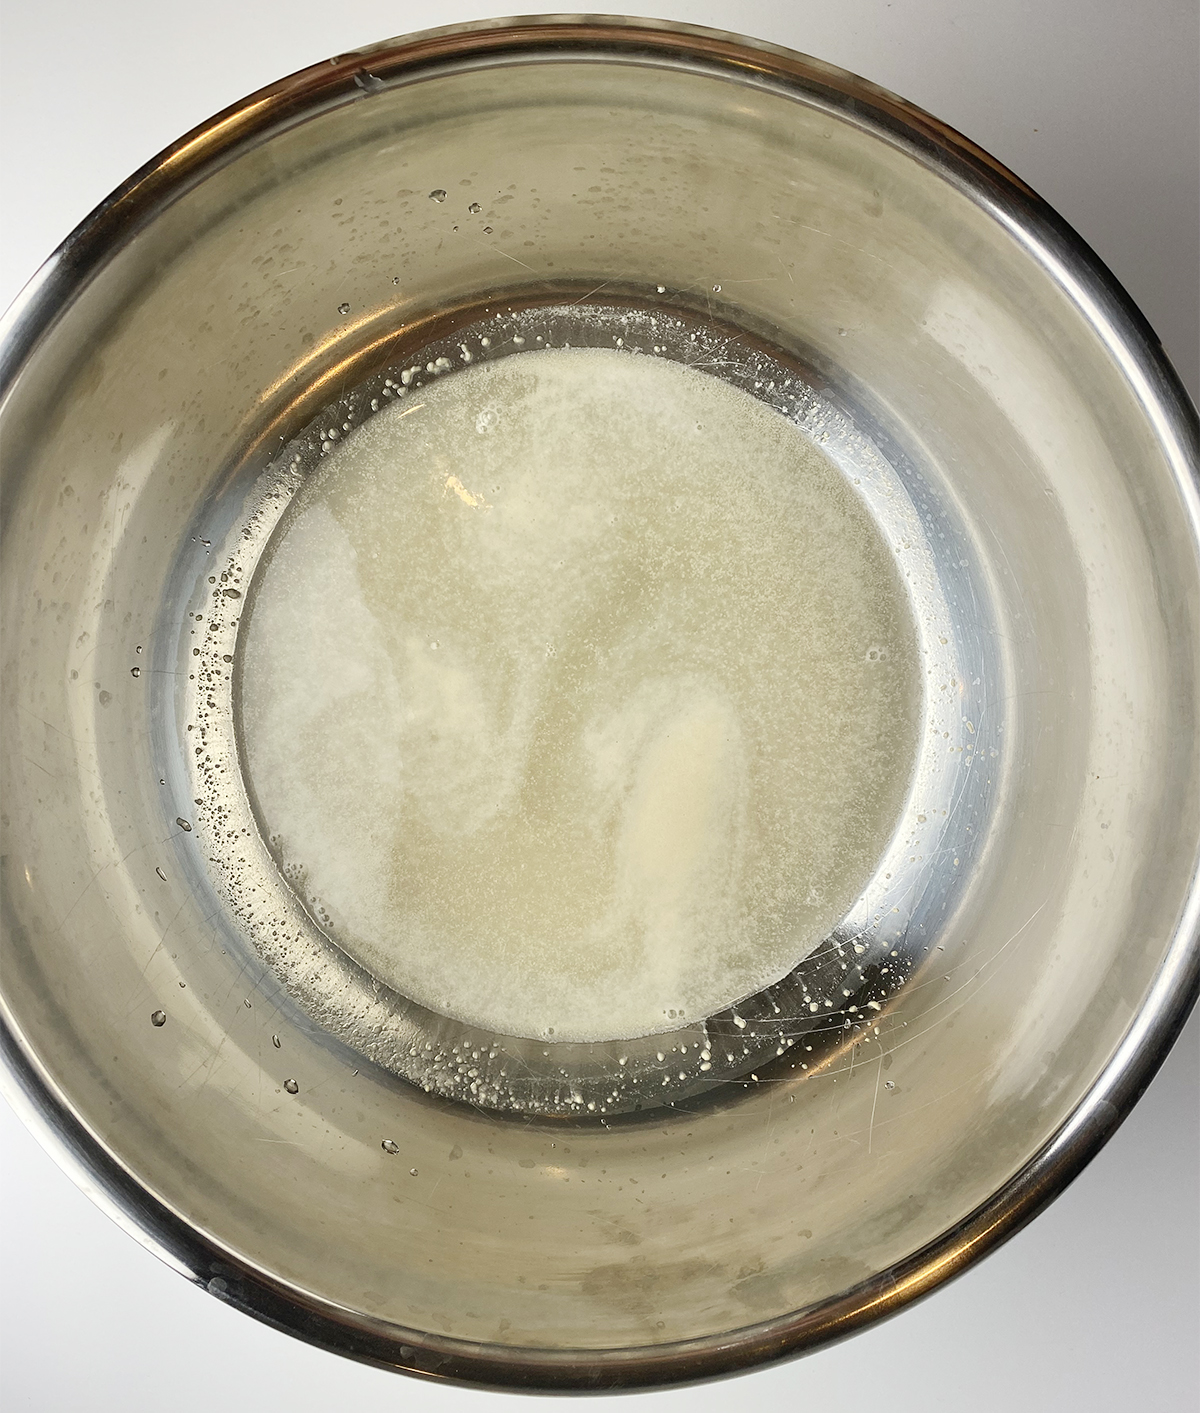 Bubbly yeast mixture in a metal bowl.